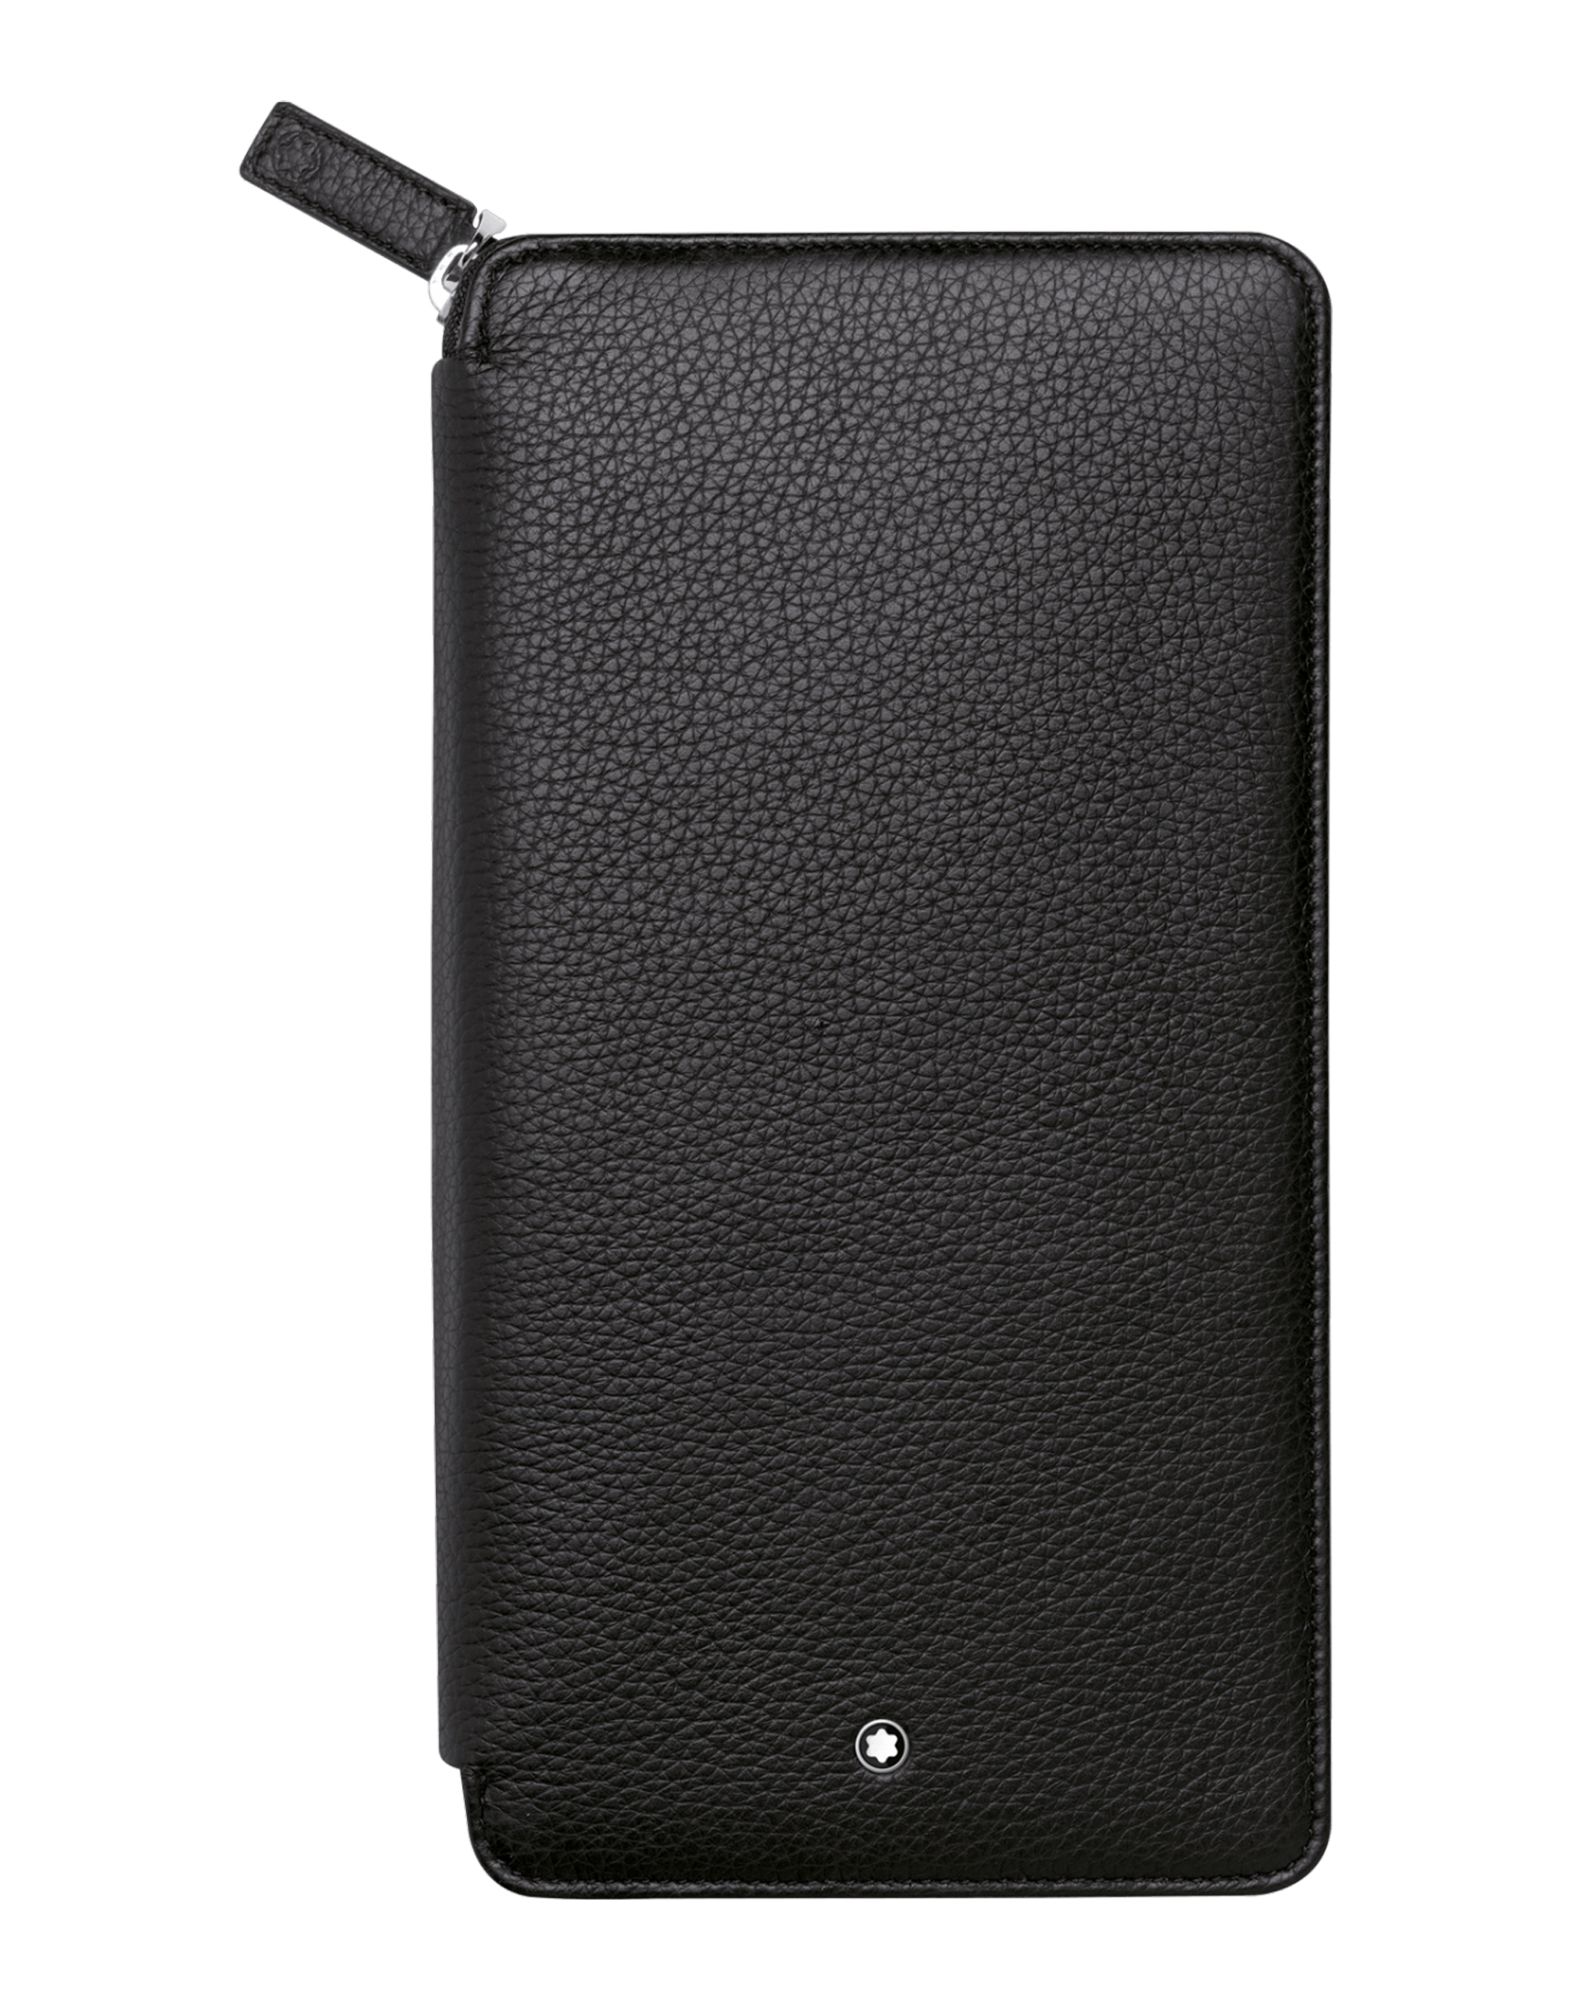 MONTBLANC MONTBLANC TRAVEL WALLET 13CC WITH ZIP WALLET BLACK SIZE - COWHIDE,46487158KL 1